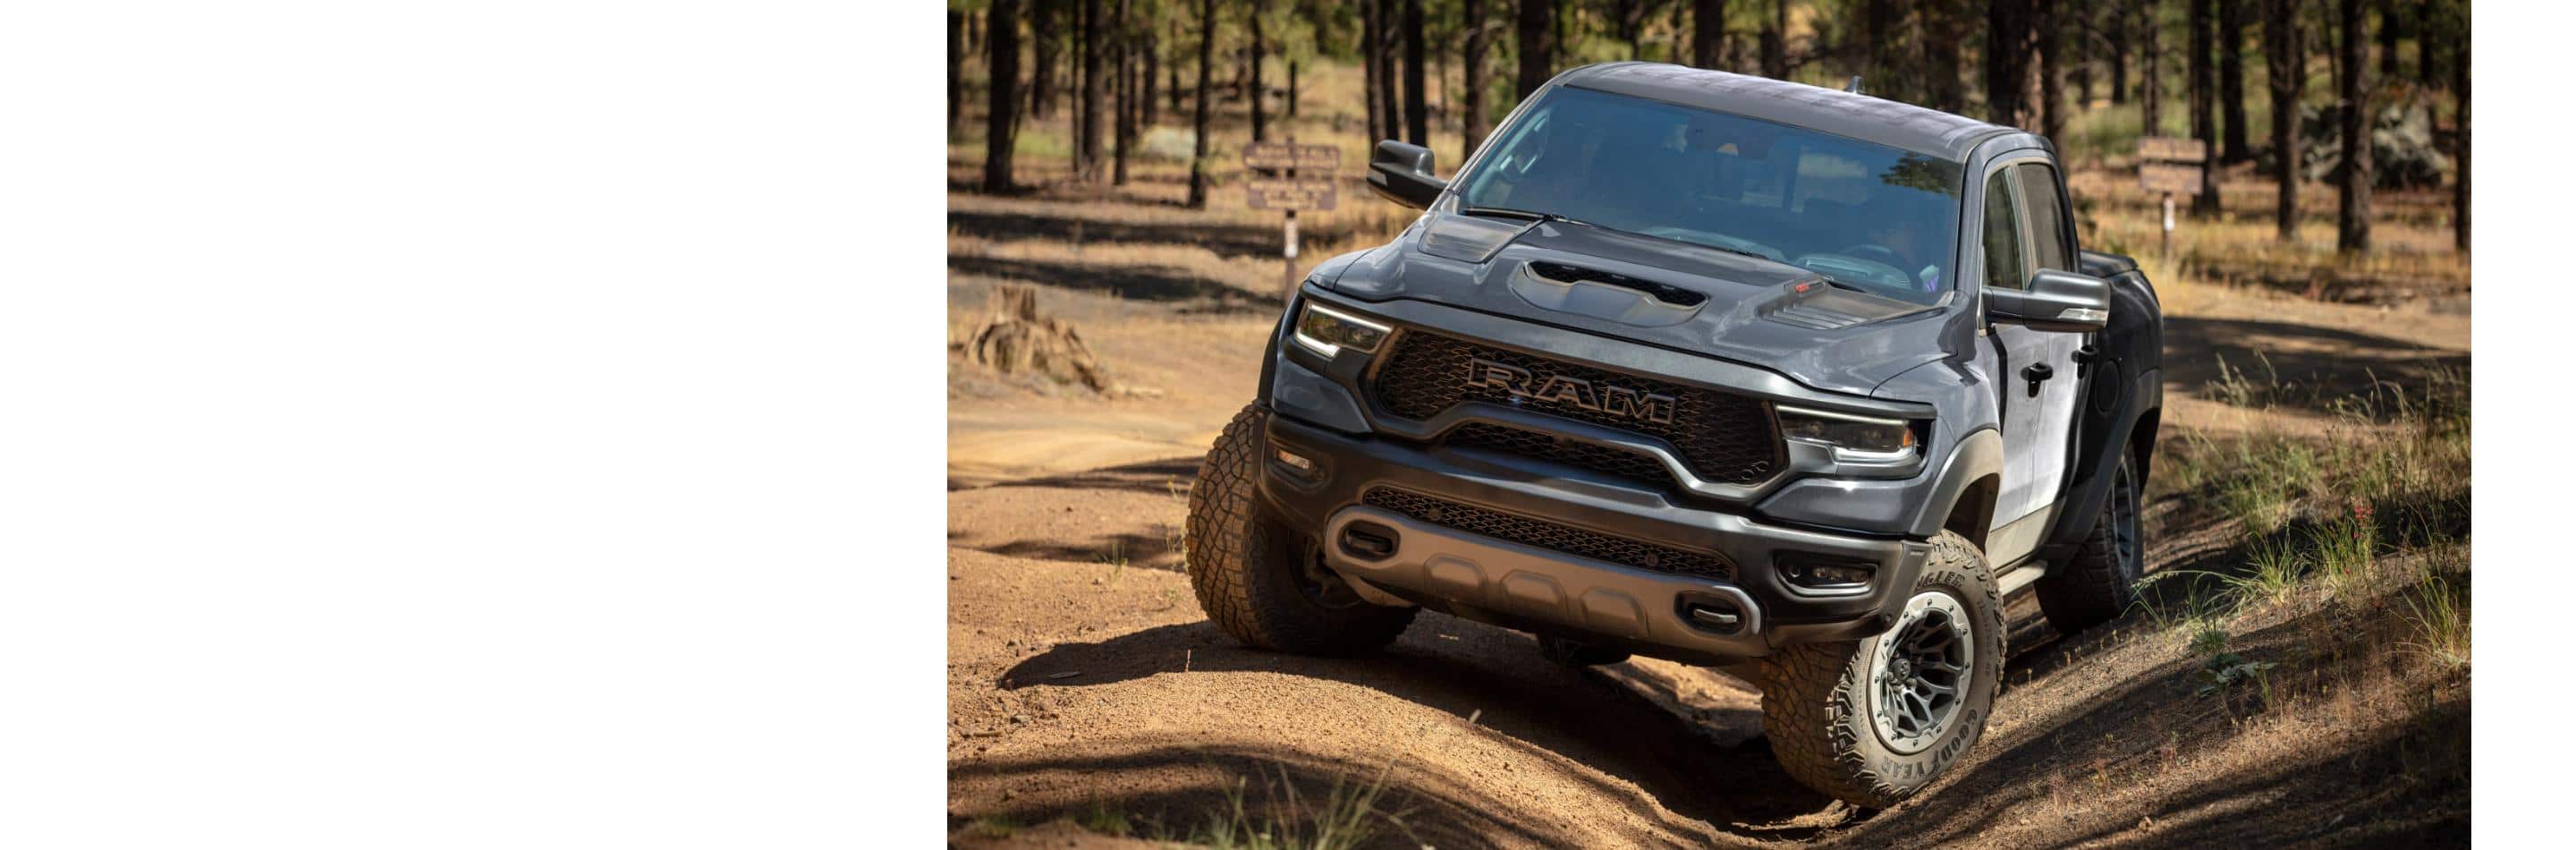 The 2024 Ram 1500 TRX Crew Cab being driven off-road on uneven terrain, with the front driver-side wheel in a shallow ditch and the other wheels elevated.